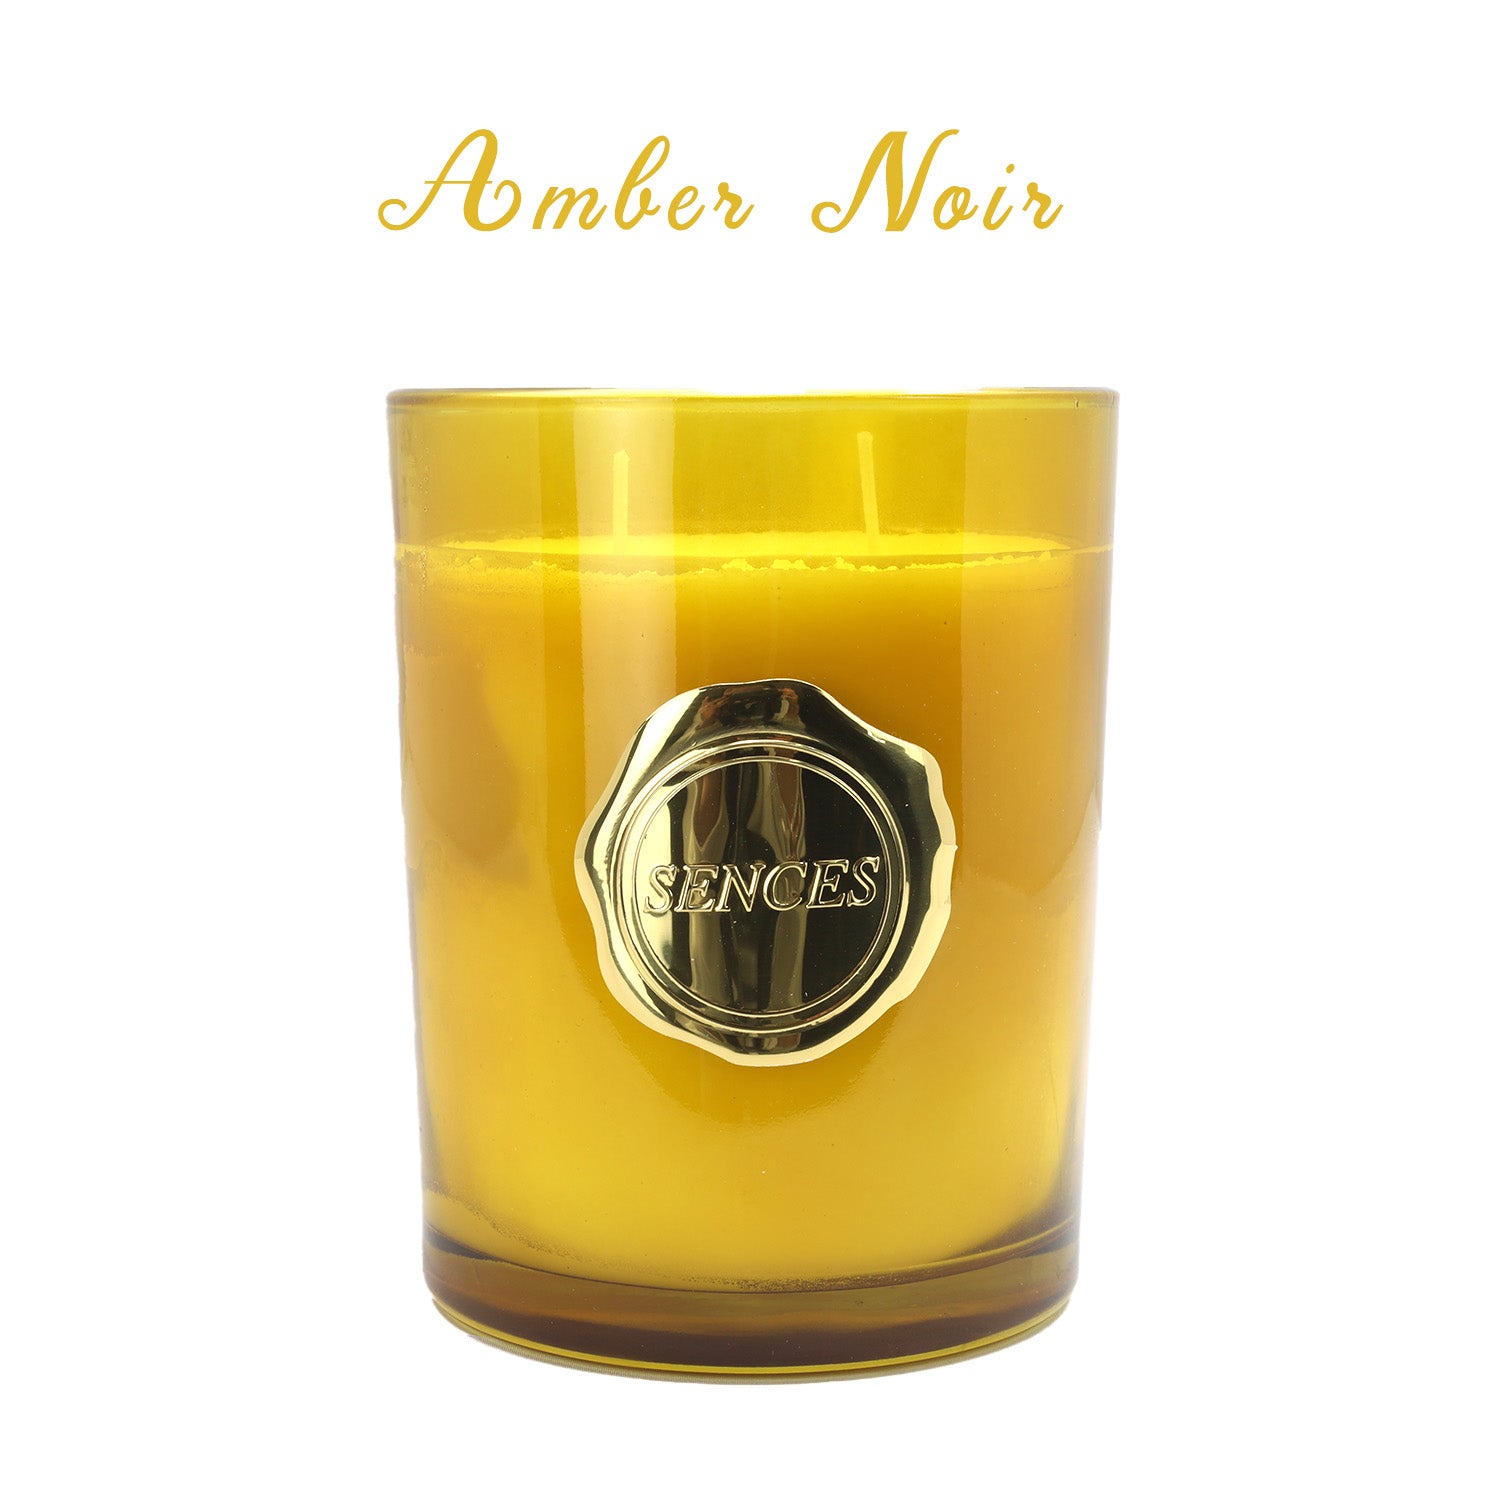 2-Wicks 470g Scented Candle Amber Noir